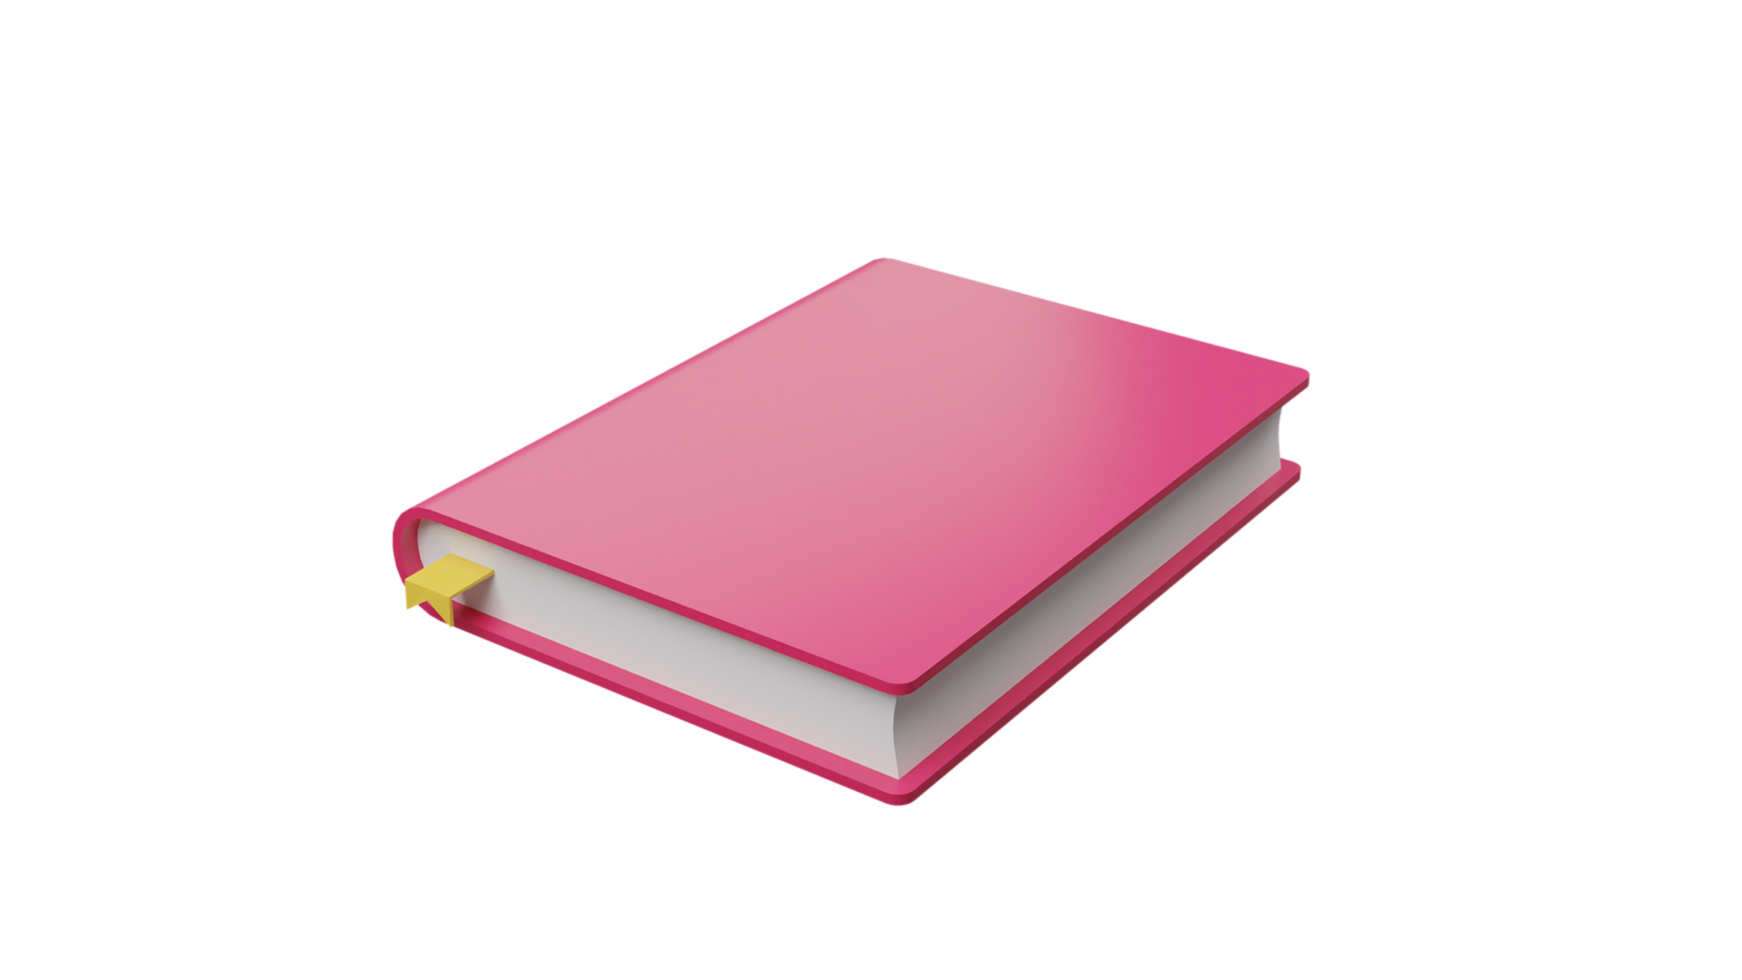 3d Books icon for web design isolated, Education and online class concept. 3d illustration png